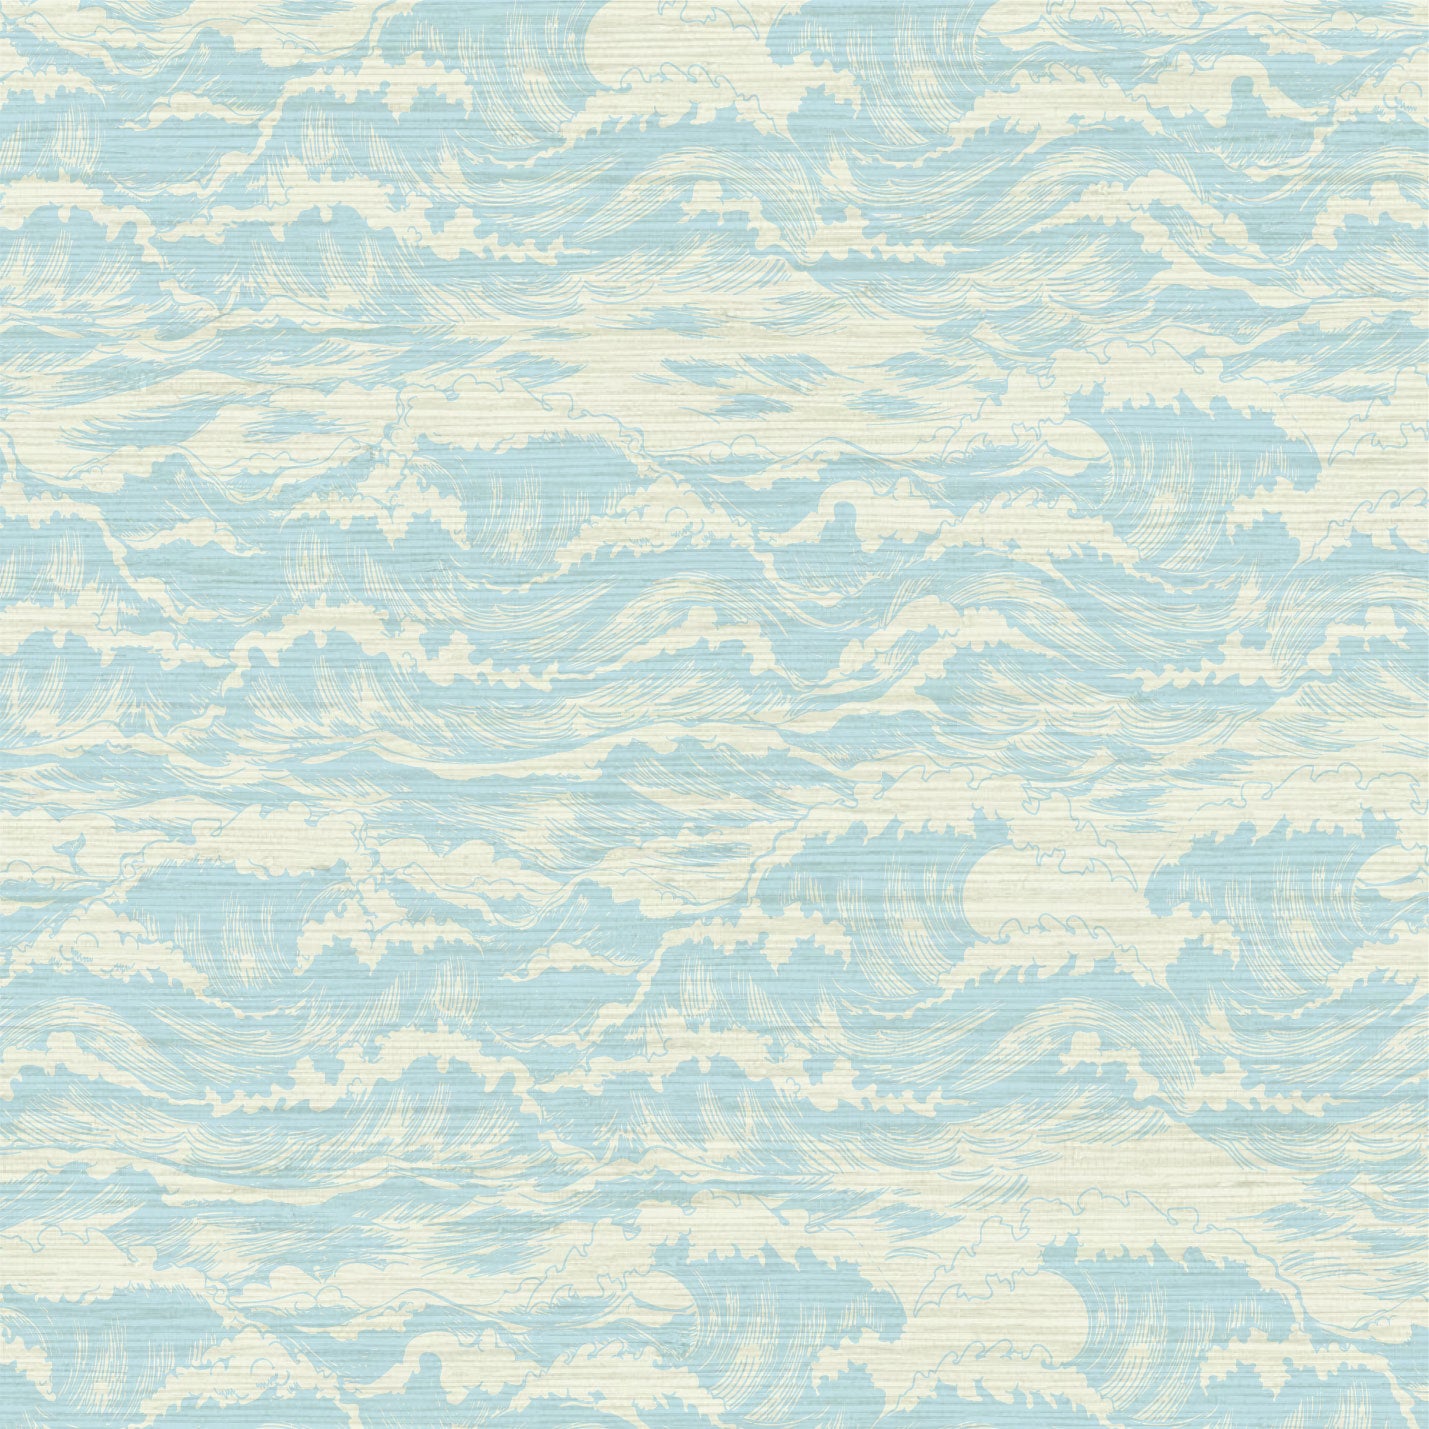 Load image into Gallery viewer, Grasscloth wallpaper Natural Textured Eco-Friendly Non-toxic High-quality  Sustainable Interior Design Bold Custom Tailor-made Retro chic Seaside Coastal Seashore Waterfront Vacation home styling Retreat Relaxed beach vibes Beach cottage Shoreline Oceanfront Nautical Cabana ocean waves water surf blue teal light blue
